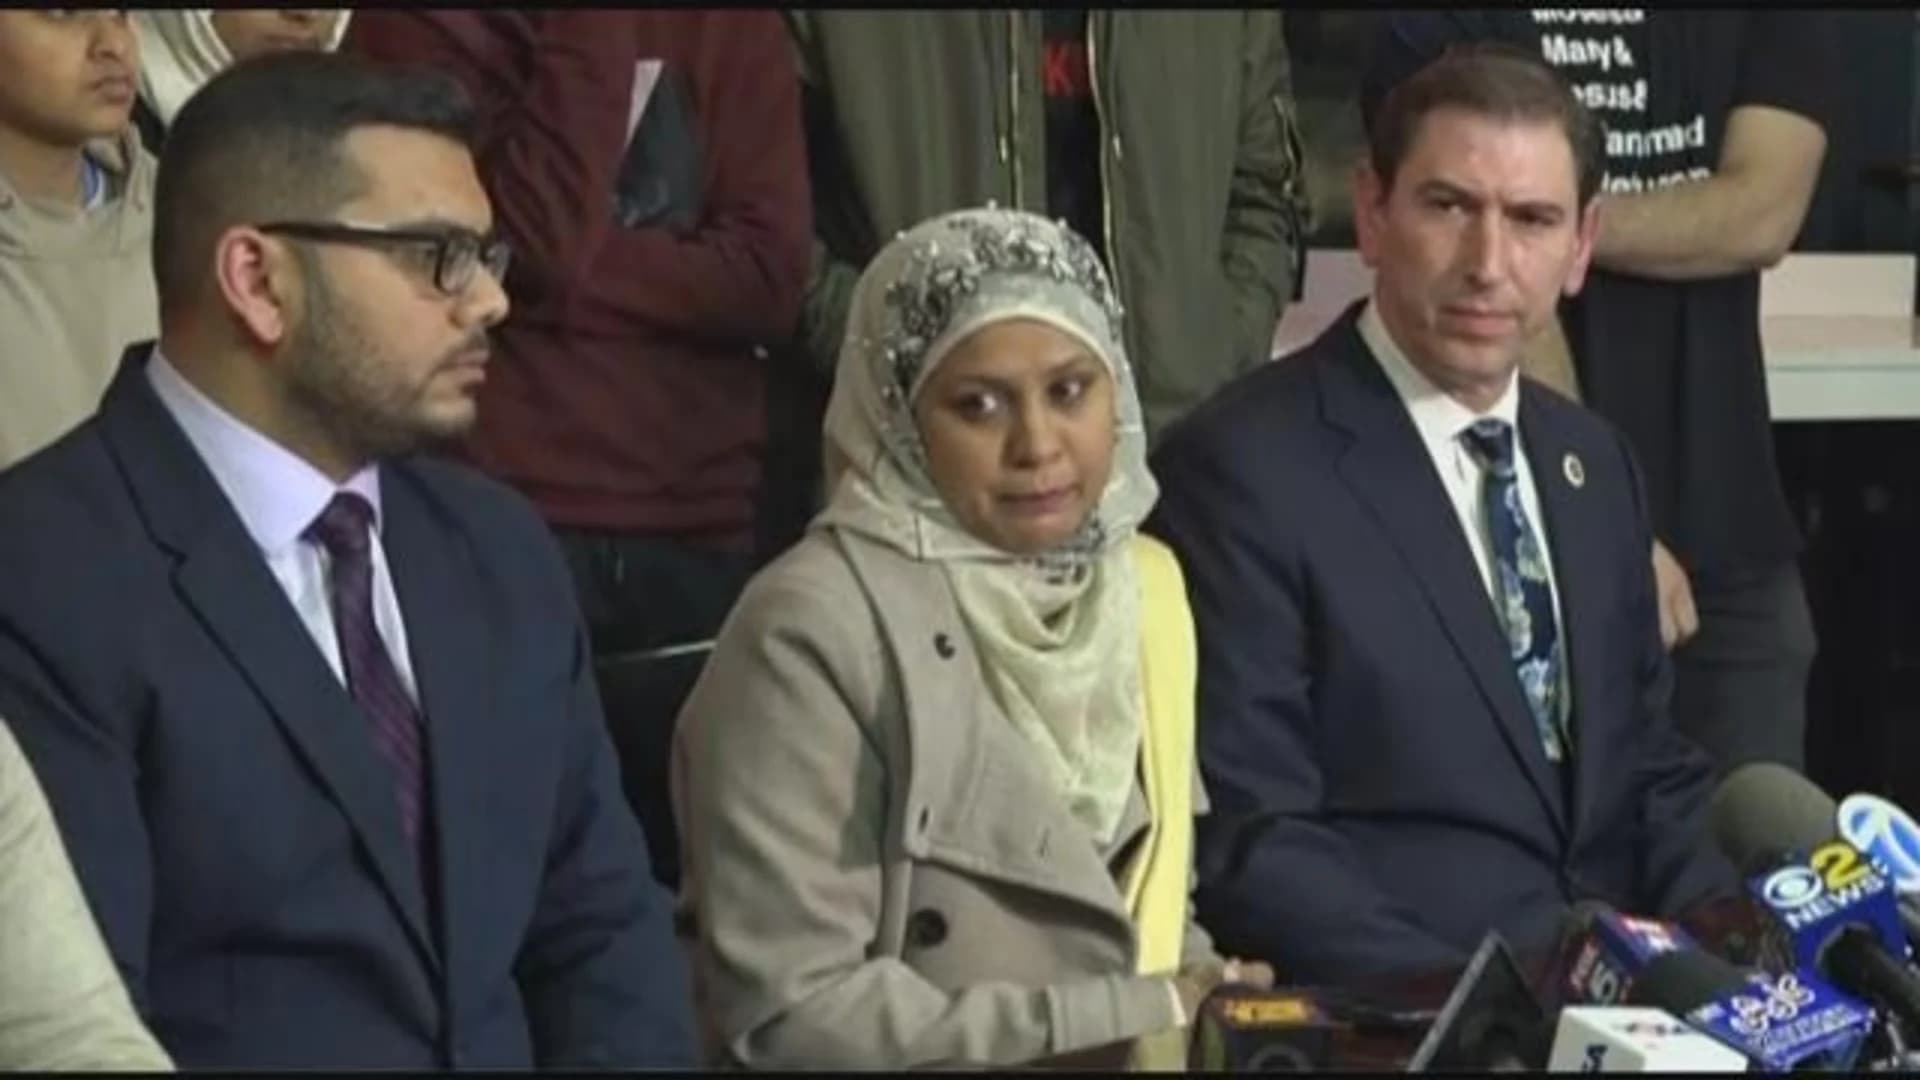 Muslim woman says she was attacked on Avenue H in possible hate crime